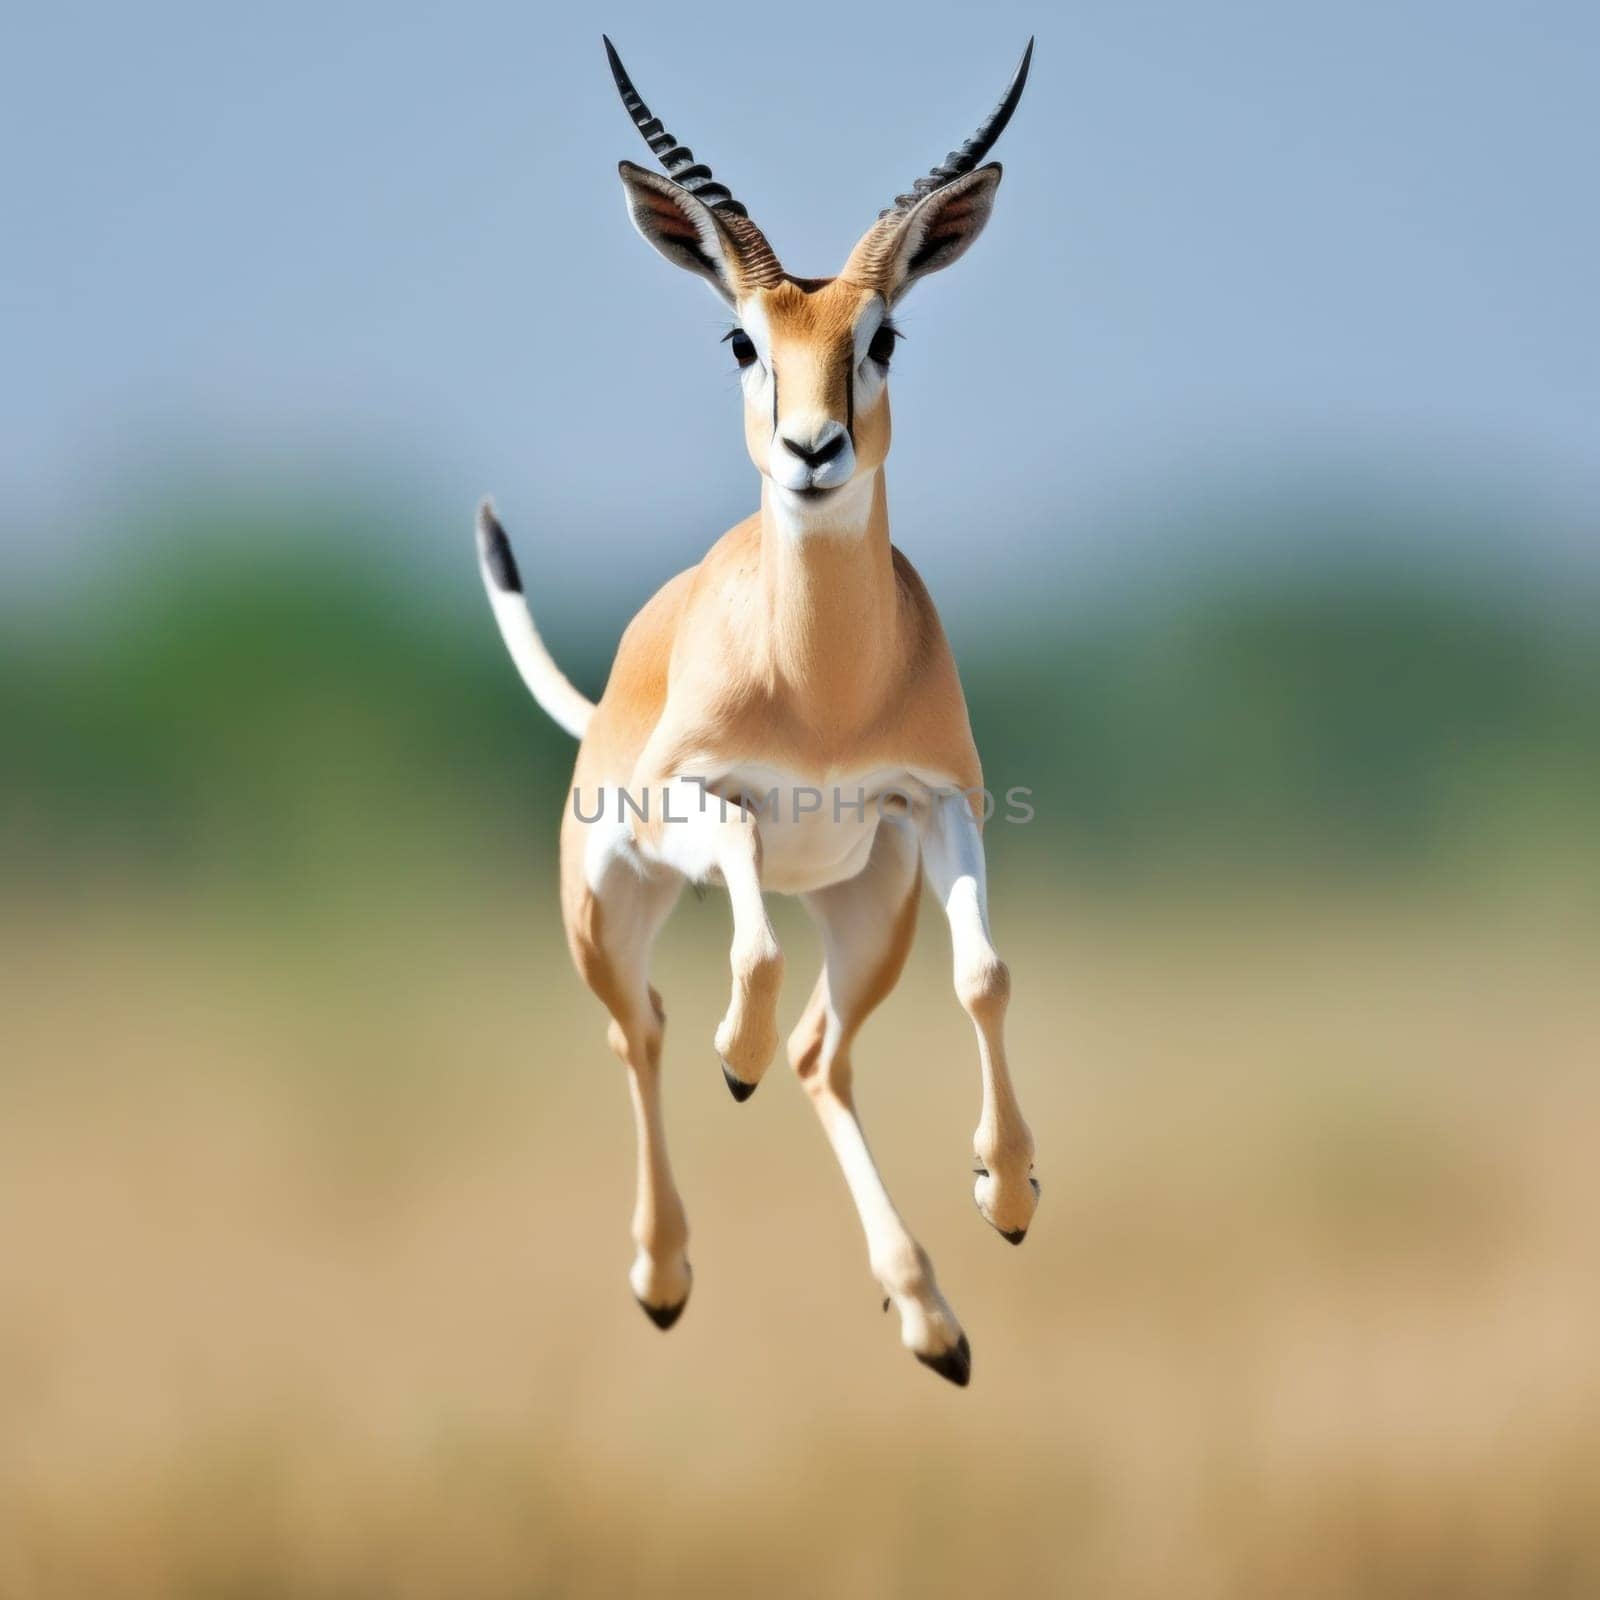 A gazelle leaping through the air in a grassy field